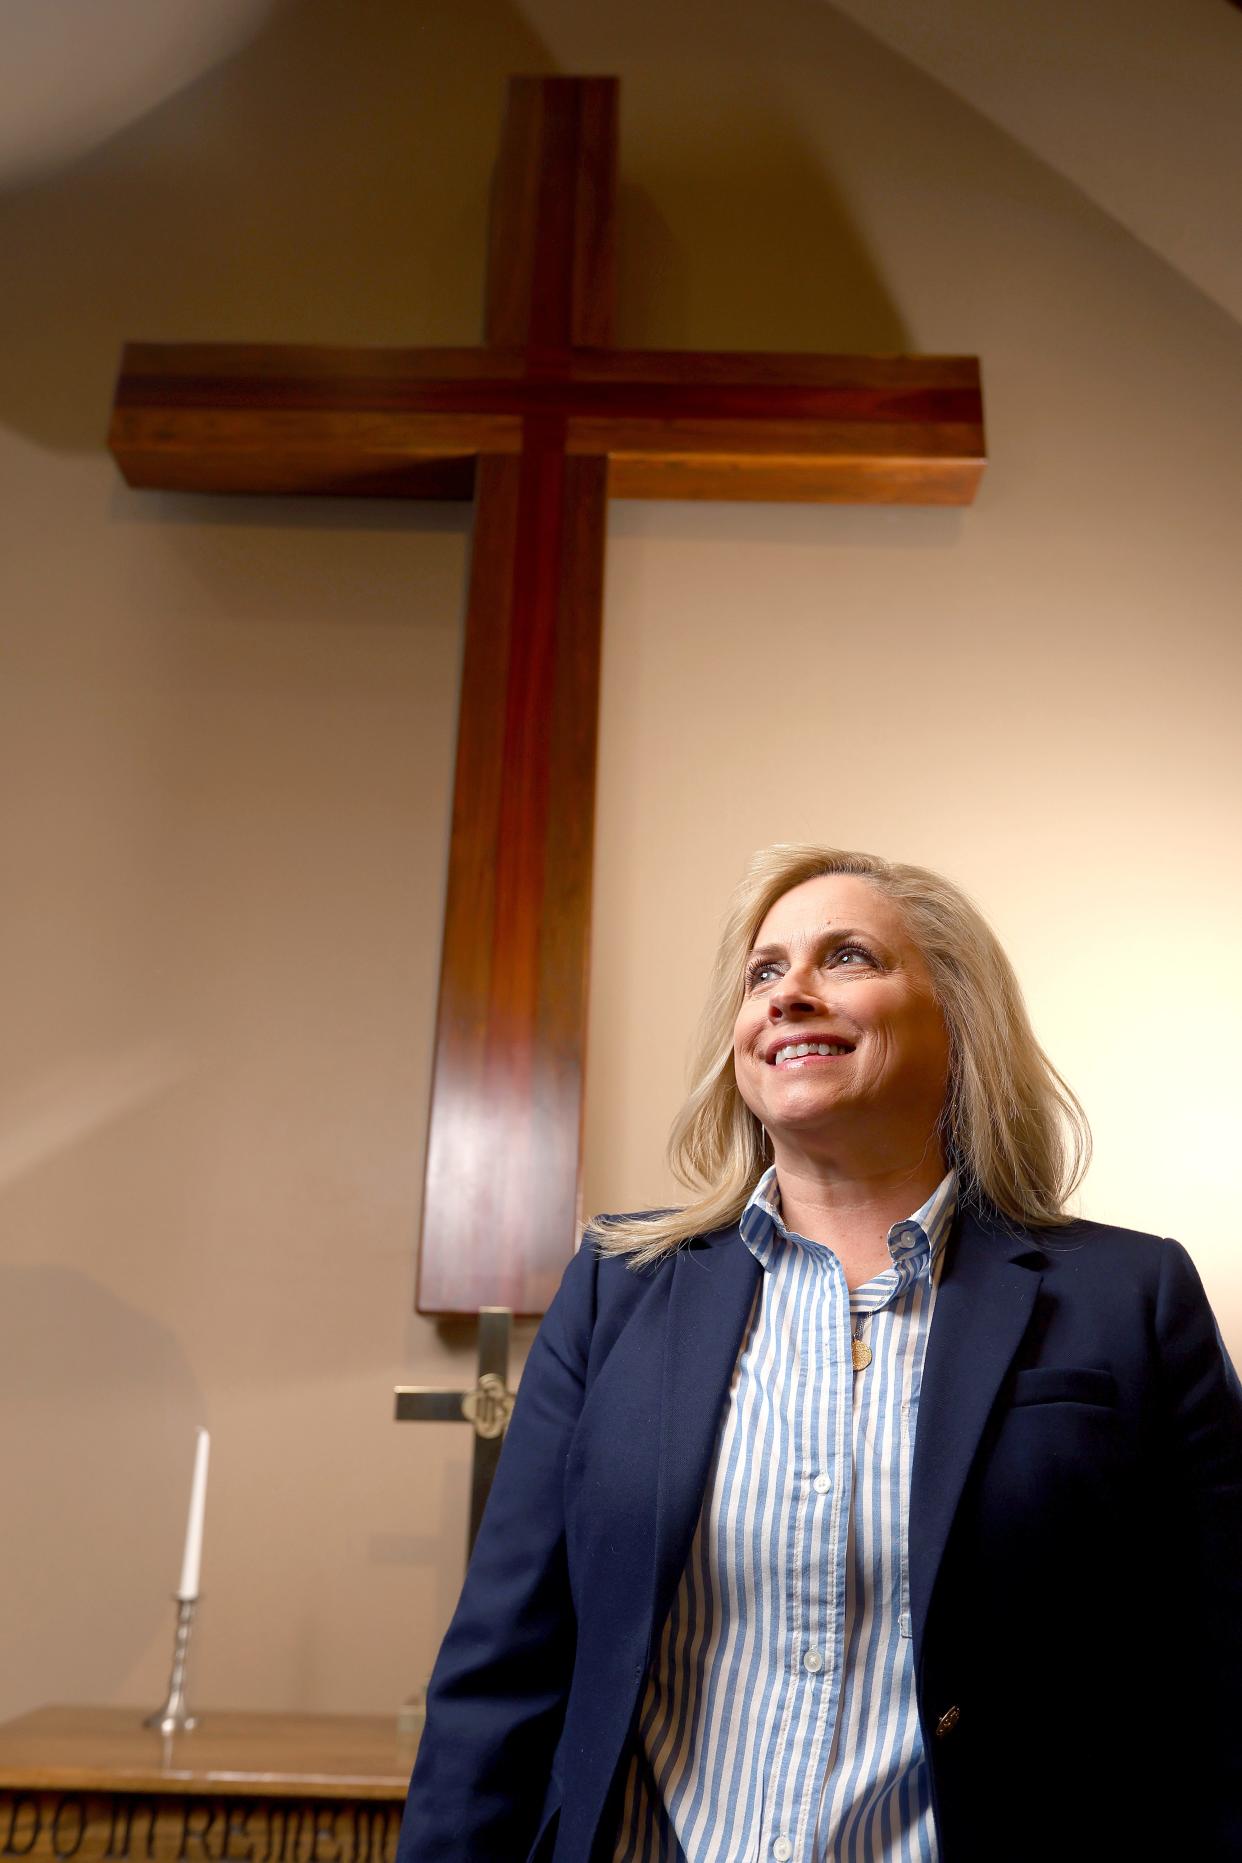 Chantelle Foster is seen recently at Acts 2 United Methodist church in Edmond.